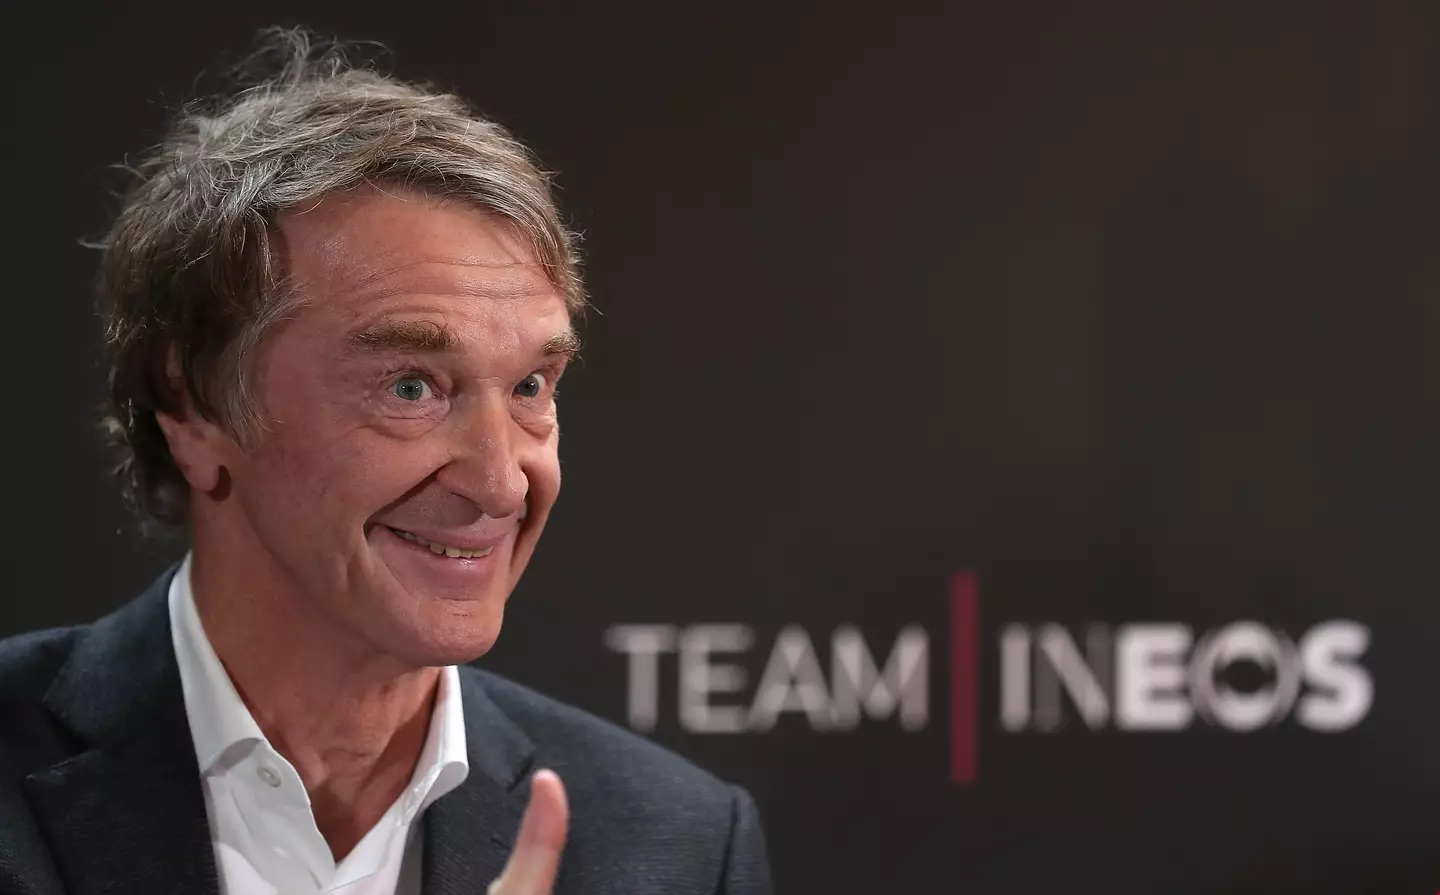 Sir Jim Ratcliffe during a press conference. (Image